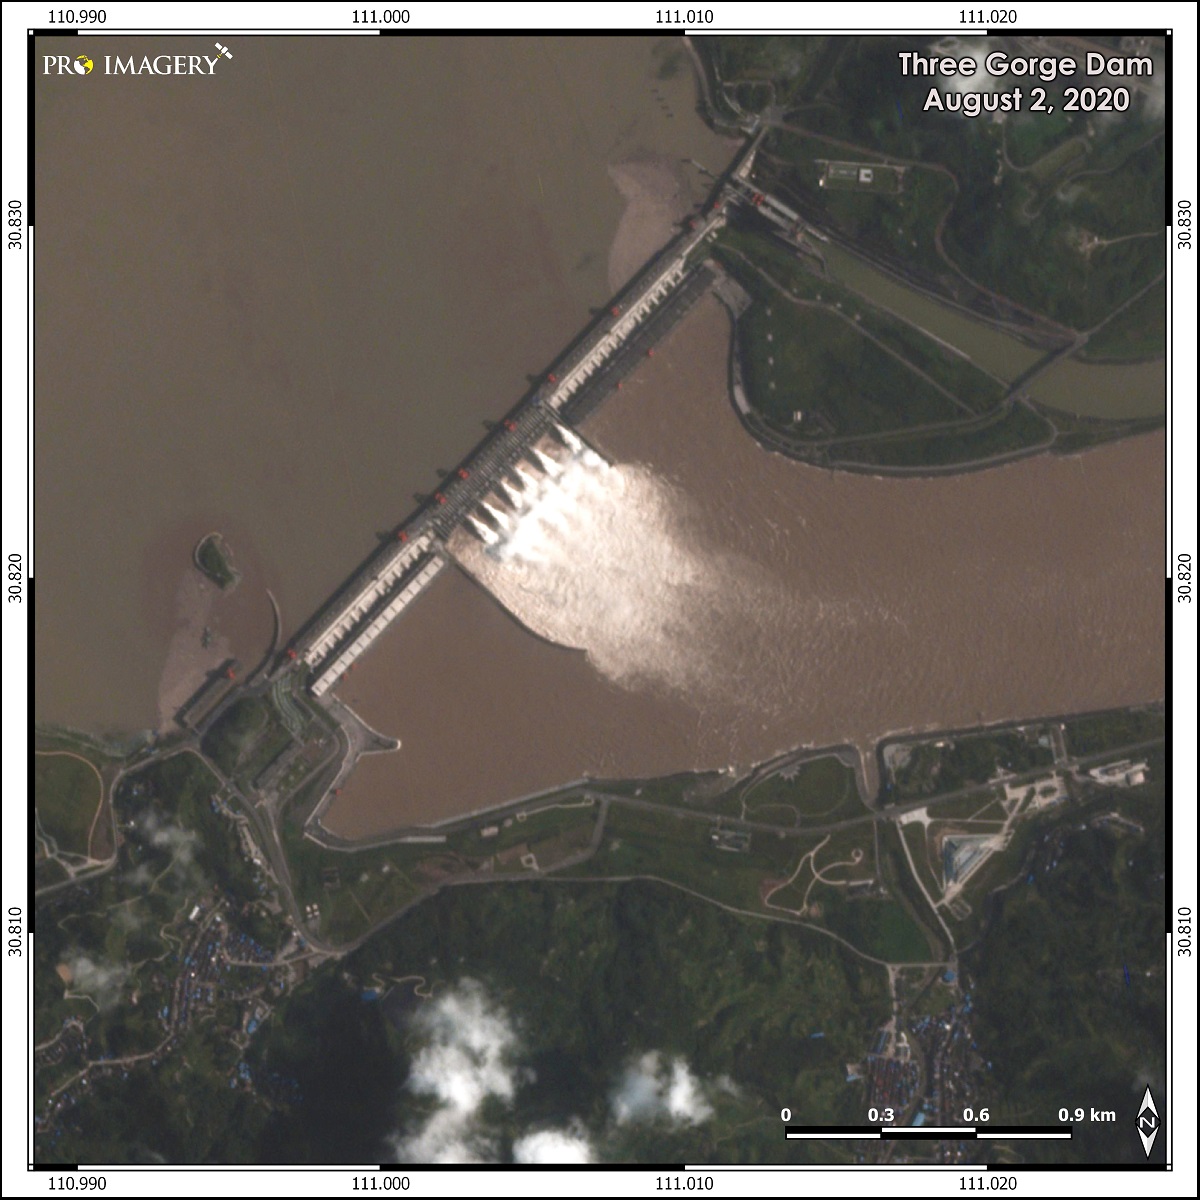 Flooding of three gorges dam - August 2, 2020